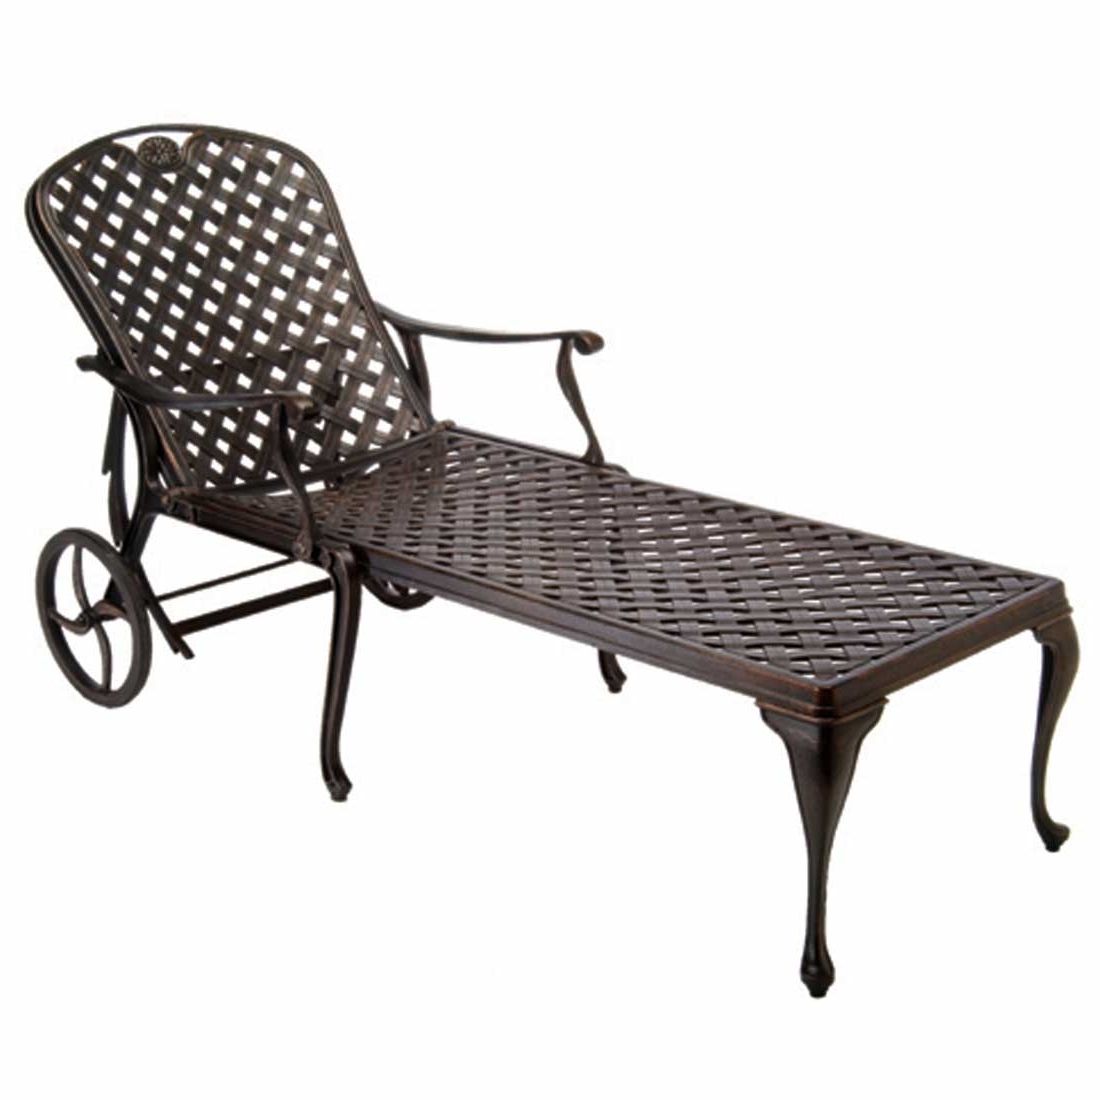 Provance Metal Chaise Lounge Chairs With Regard To Most Recently Released Atlanta Chaise Lounge Chairs (View 4 of 15)